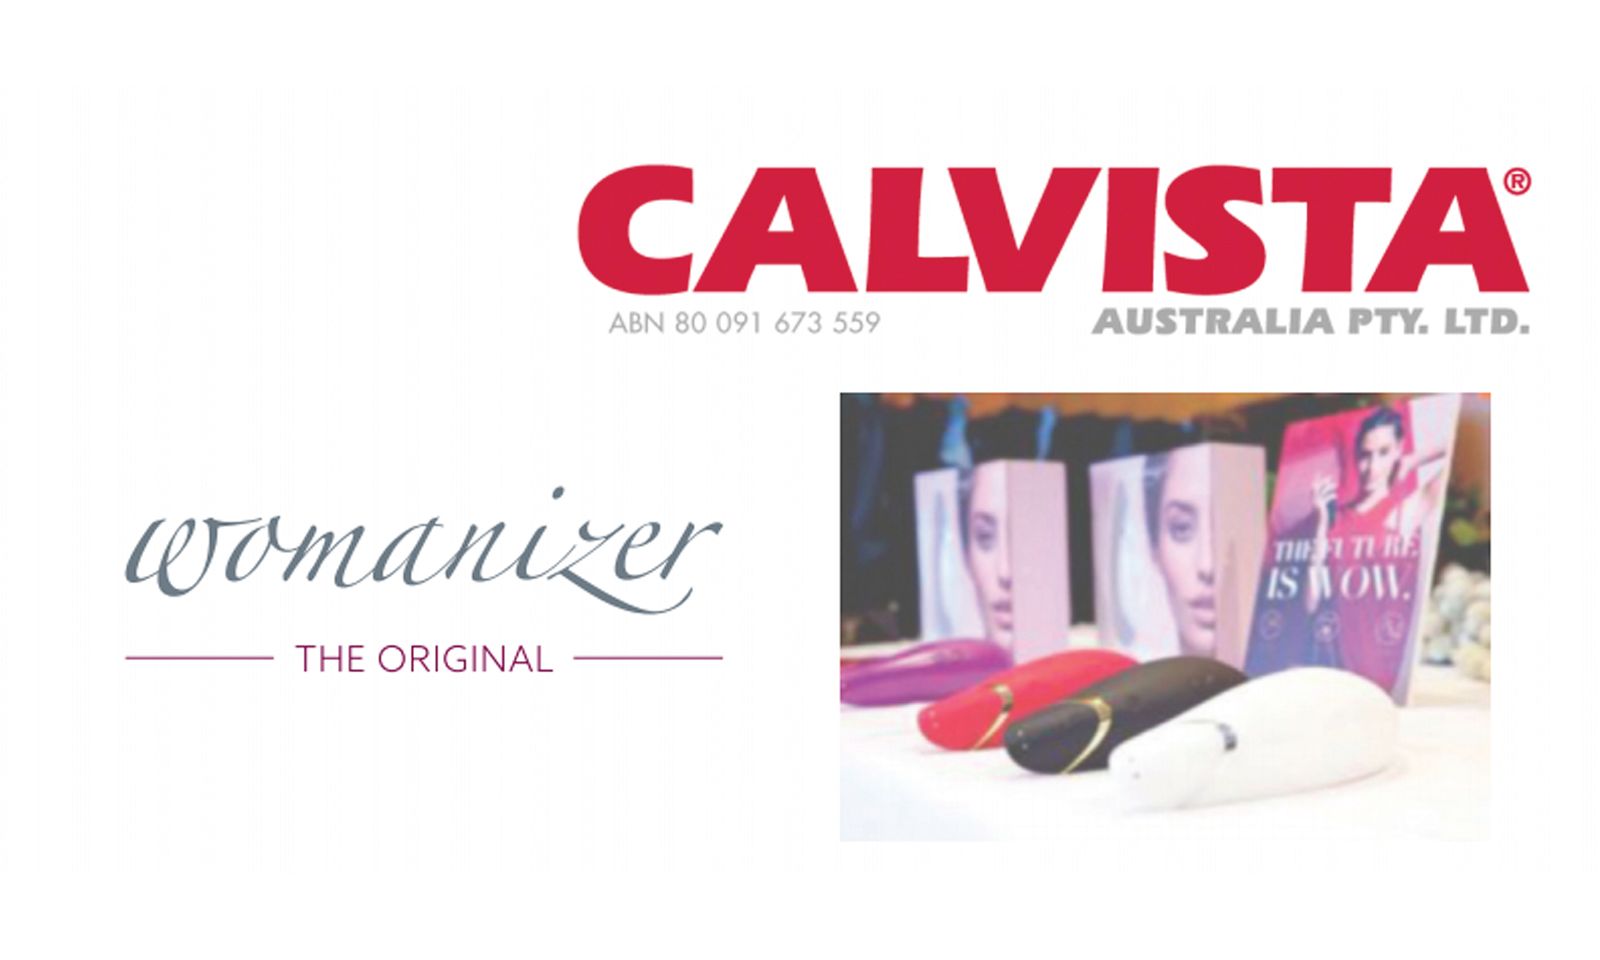 Calvista Teams With Womanizer To Host B2B Events in Australia